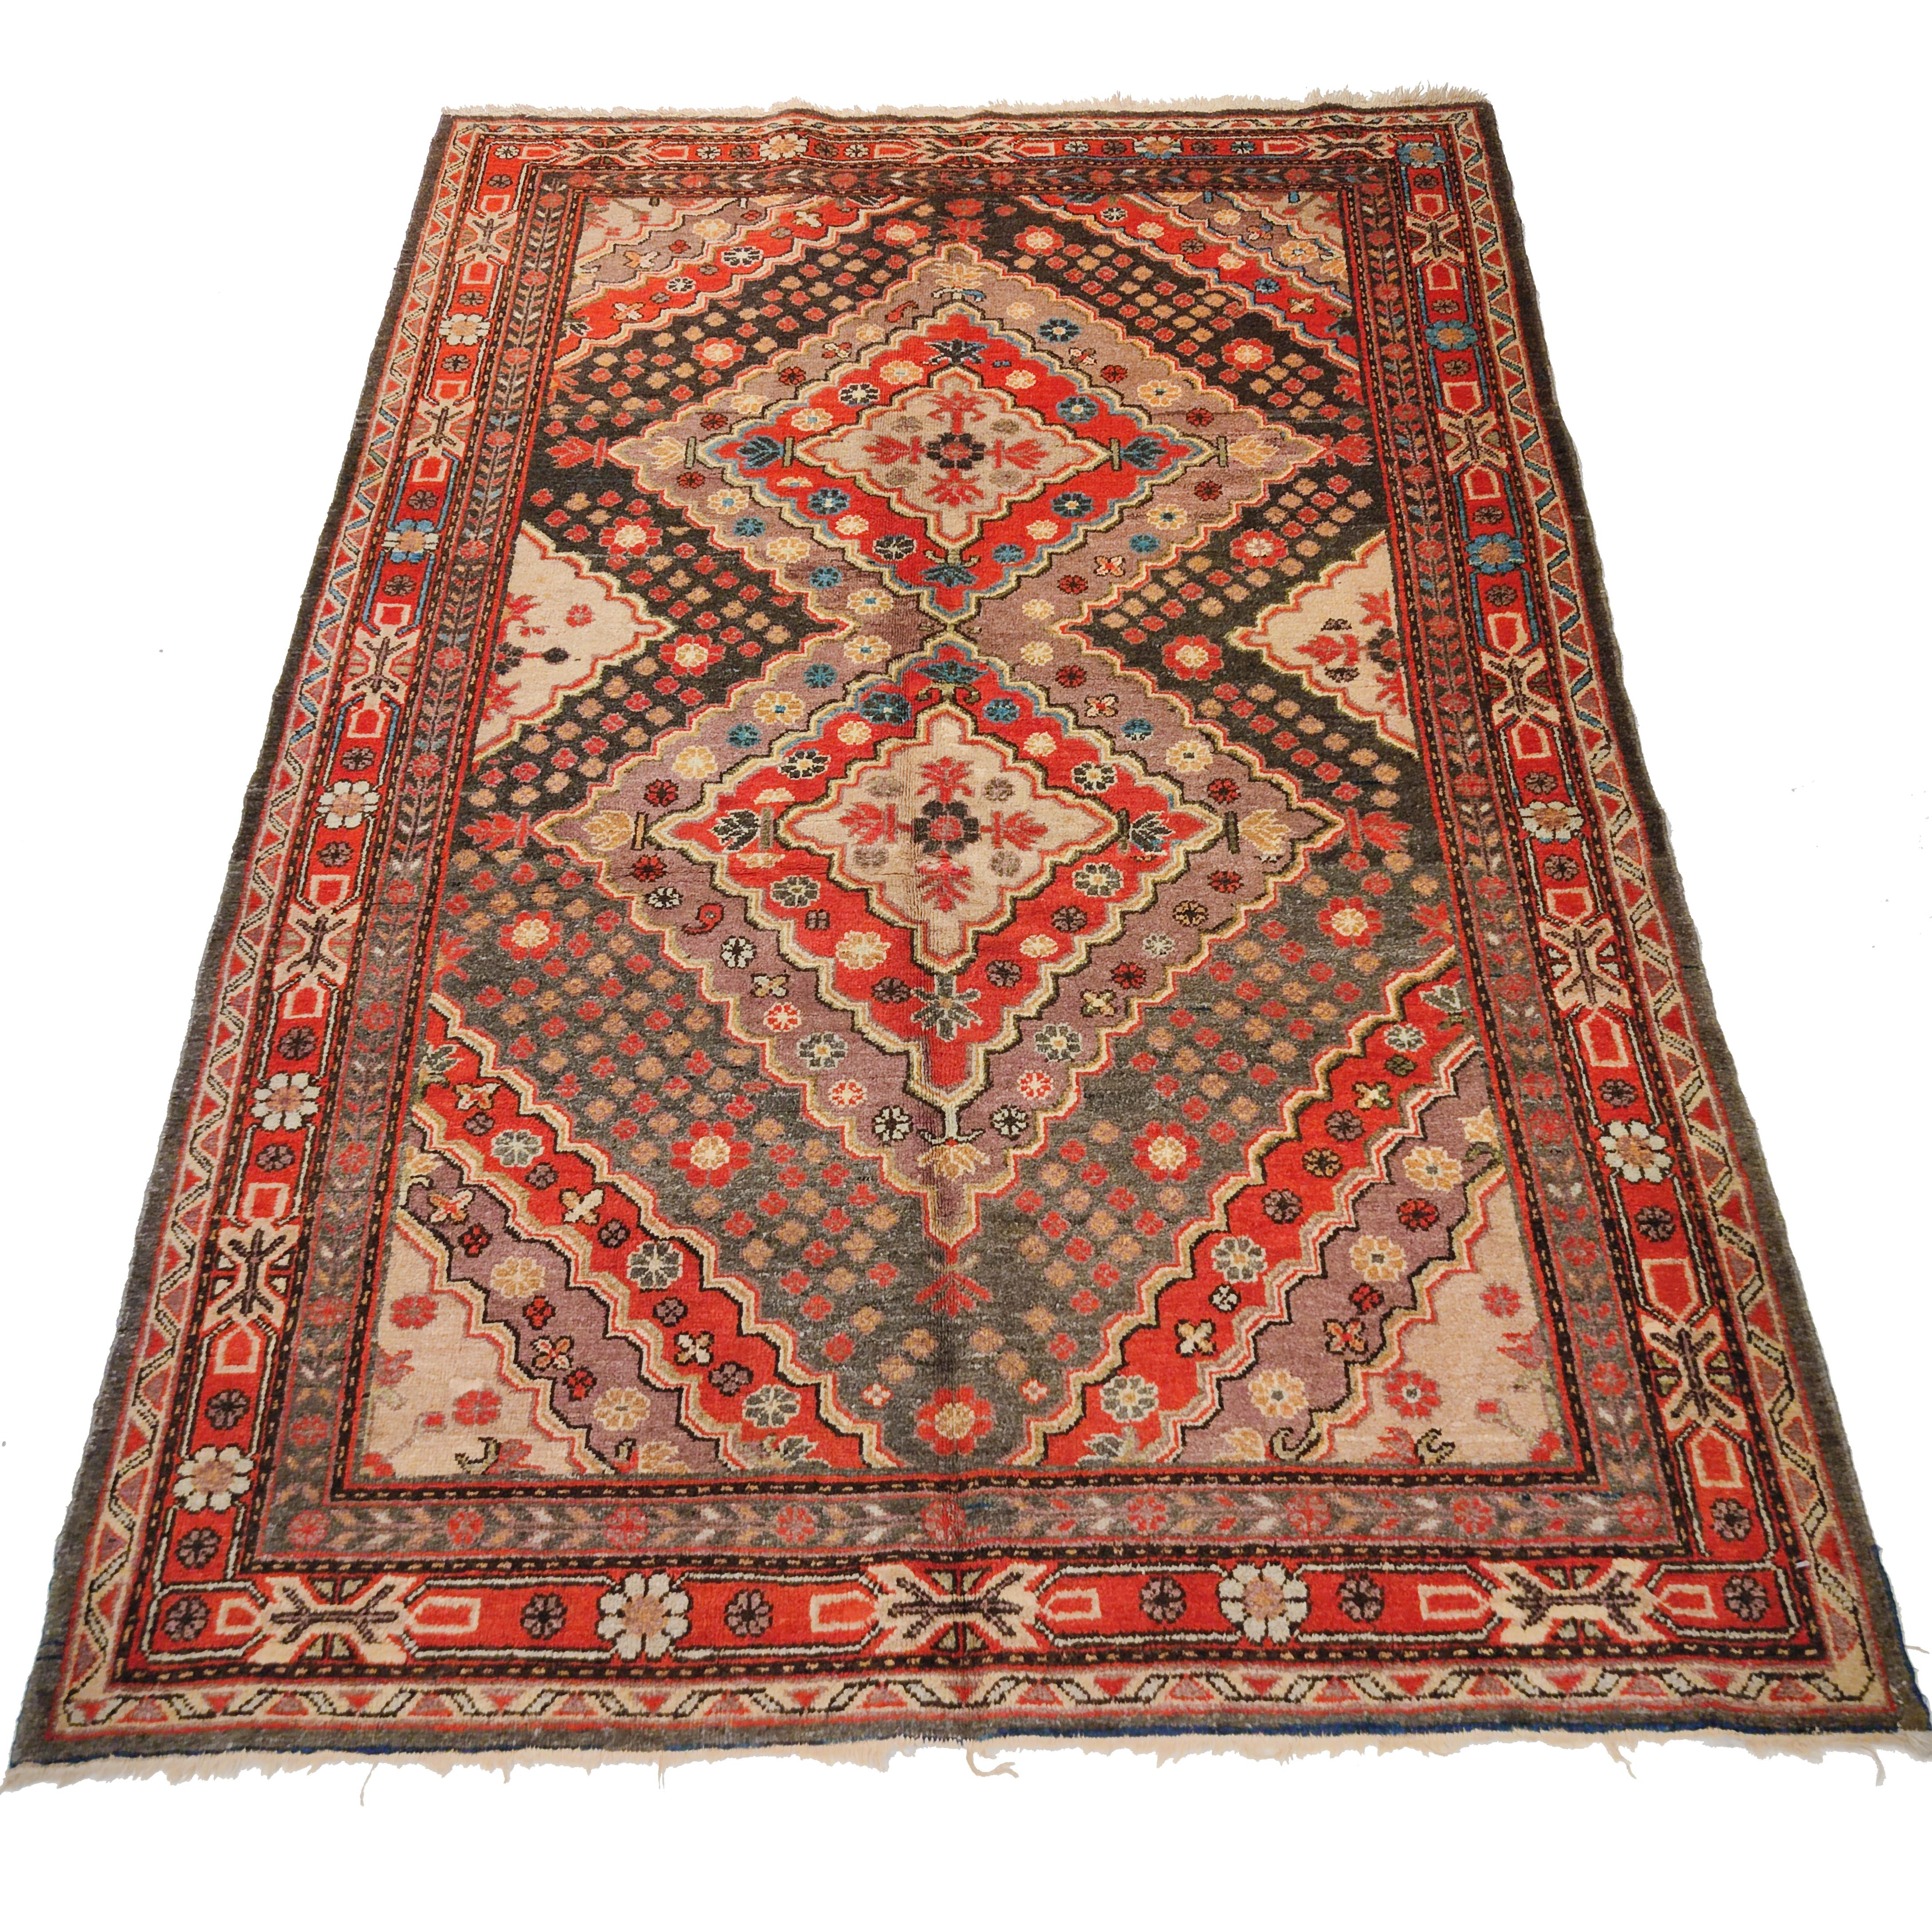 Woven during the Art Deco period, rugs of this type were commissioned by the nobility and the high ranking officers inhabiting the Tarim Basin in eastern Turkestan, which is the heartland of the oasis of Khotan, Yarkand and Kashgar. The rugs of